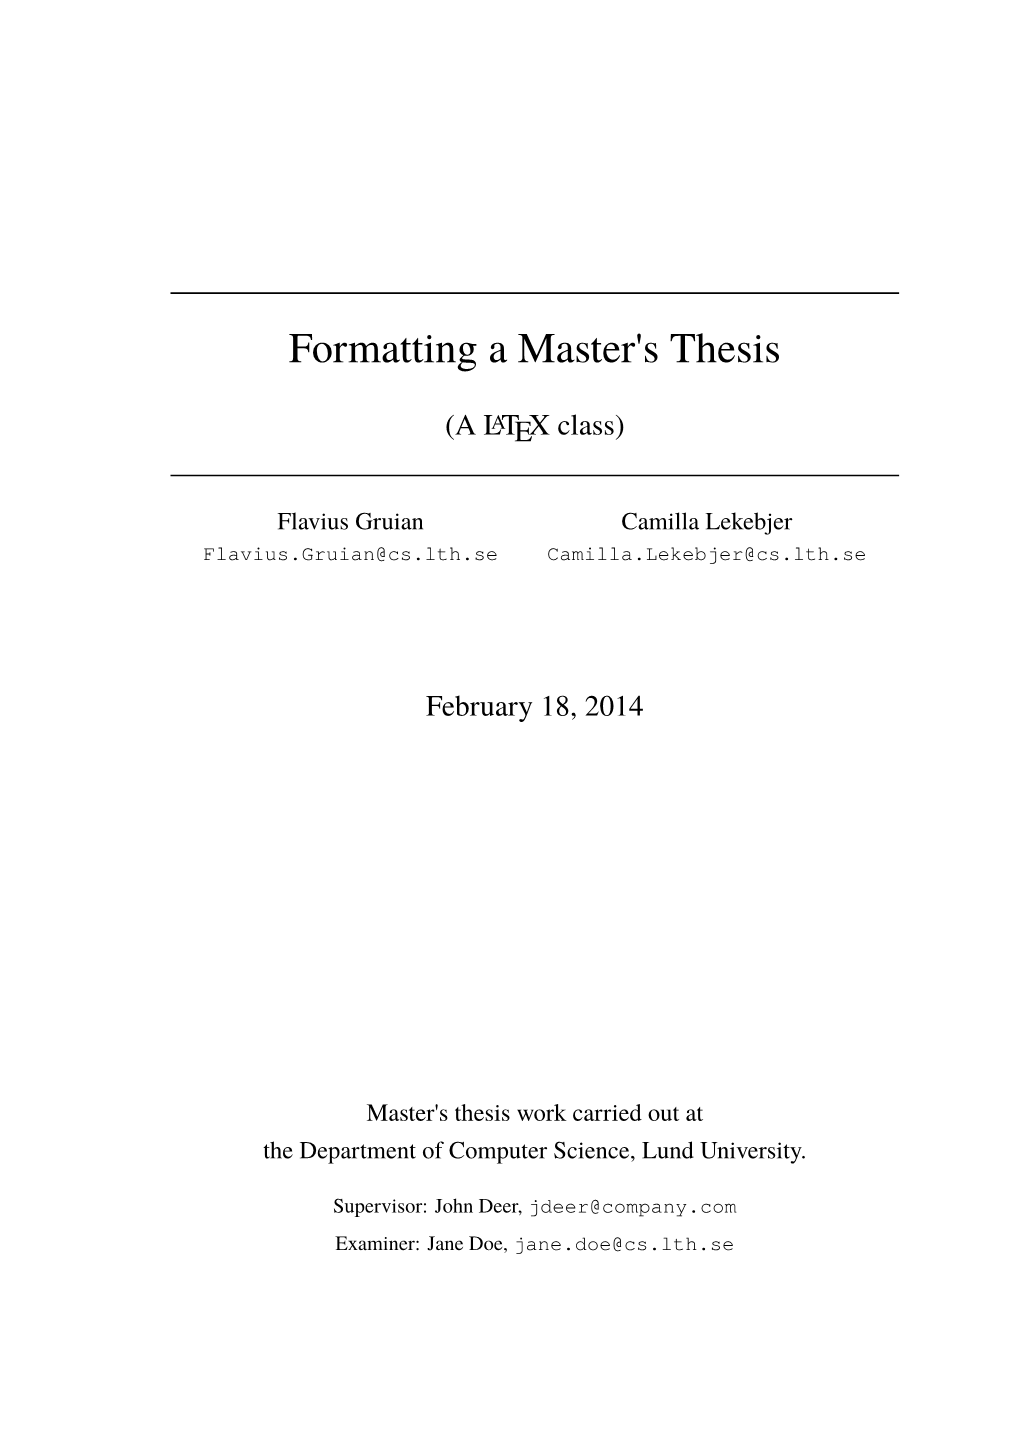 Formatting a Master's Thesis